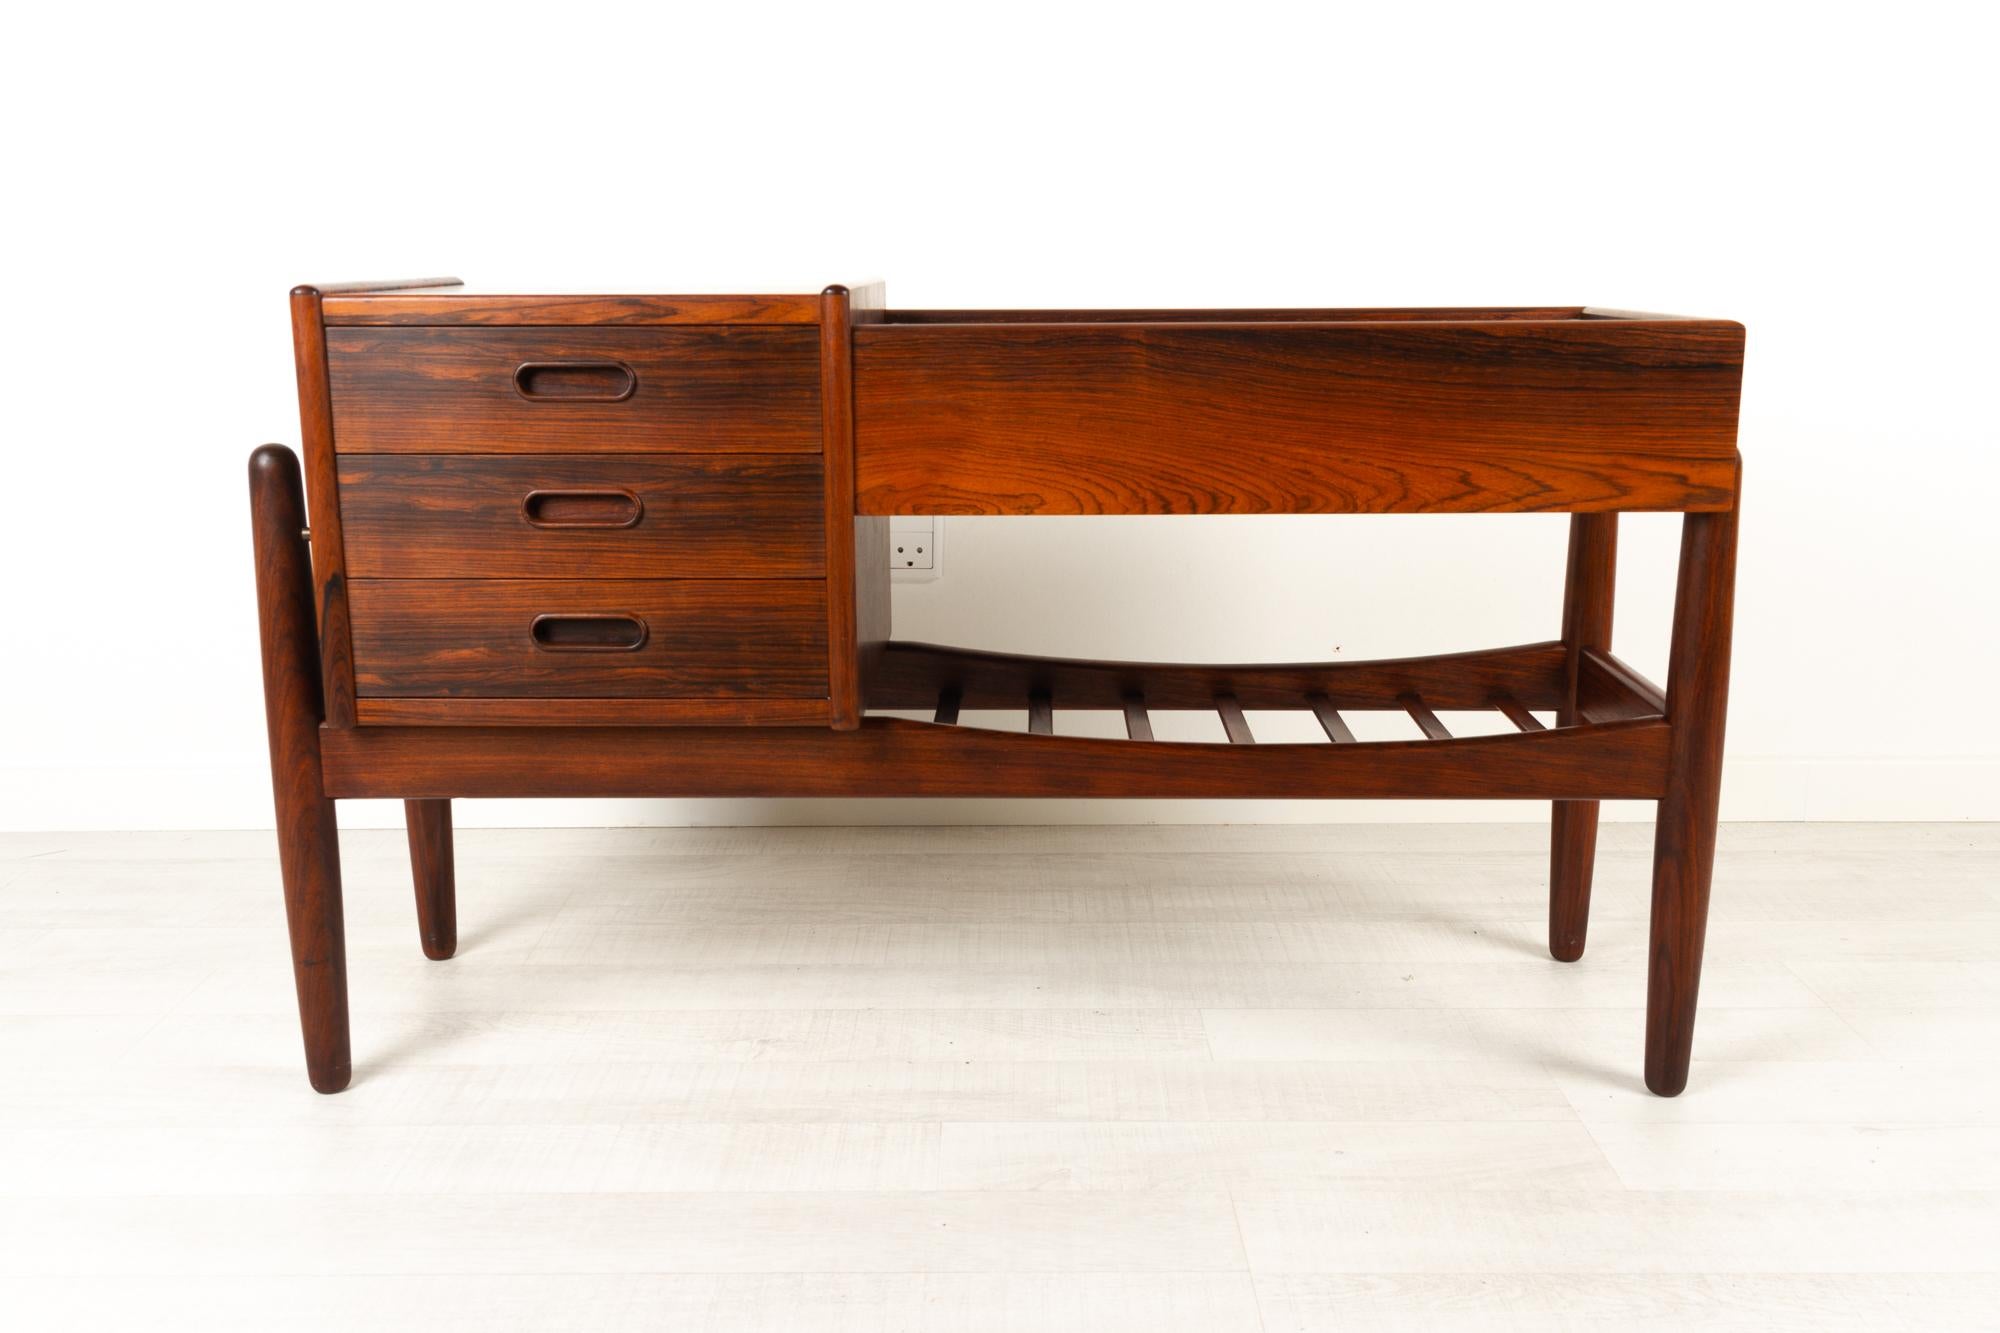 Danish modern rosewood planter by Arne Wahl Iversen, 1960s
Danish Mid-Century Modern rosewood / Palisander planter designed by Danish architect and designer Arne Wahl Iversen for Vinde Møbelfabrik. This planter has sometimes been attributed to Arne